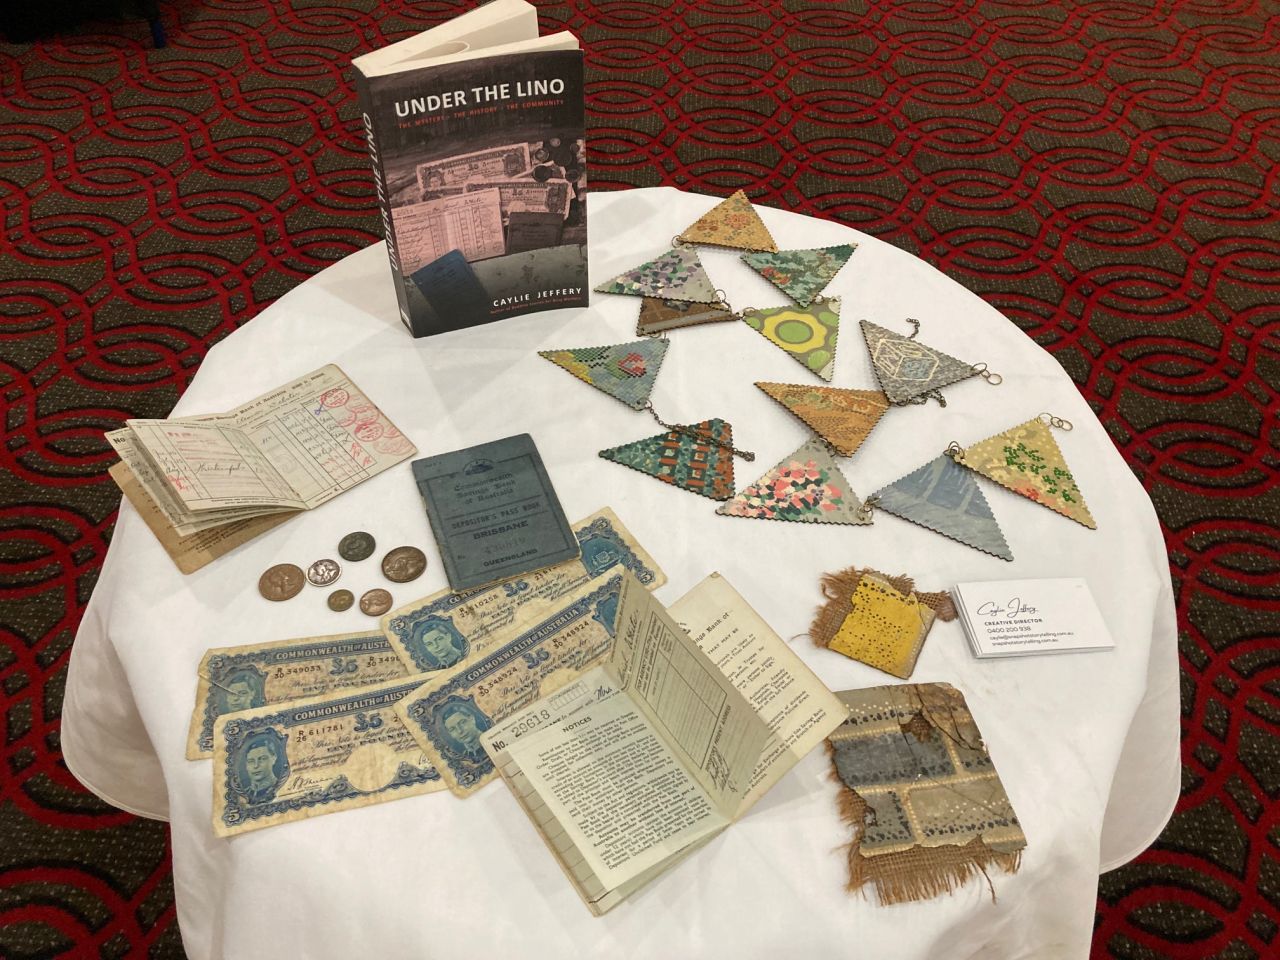 May 2022 items found under the lino of her Milton house which sparked Caylie Jeffery to research and write the book "Under The Lino"